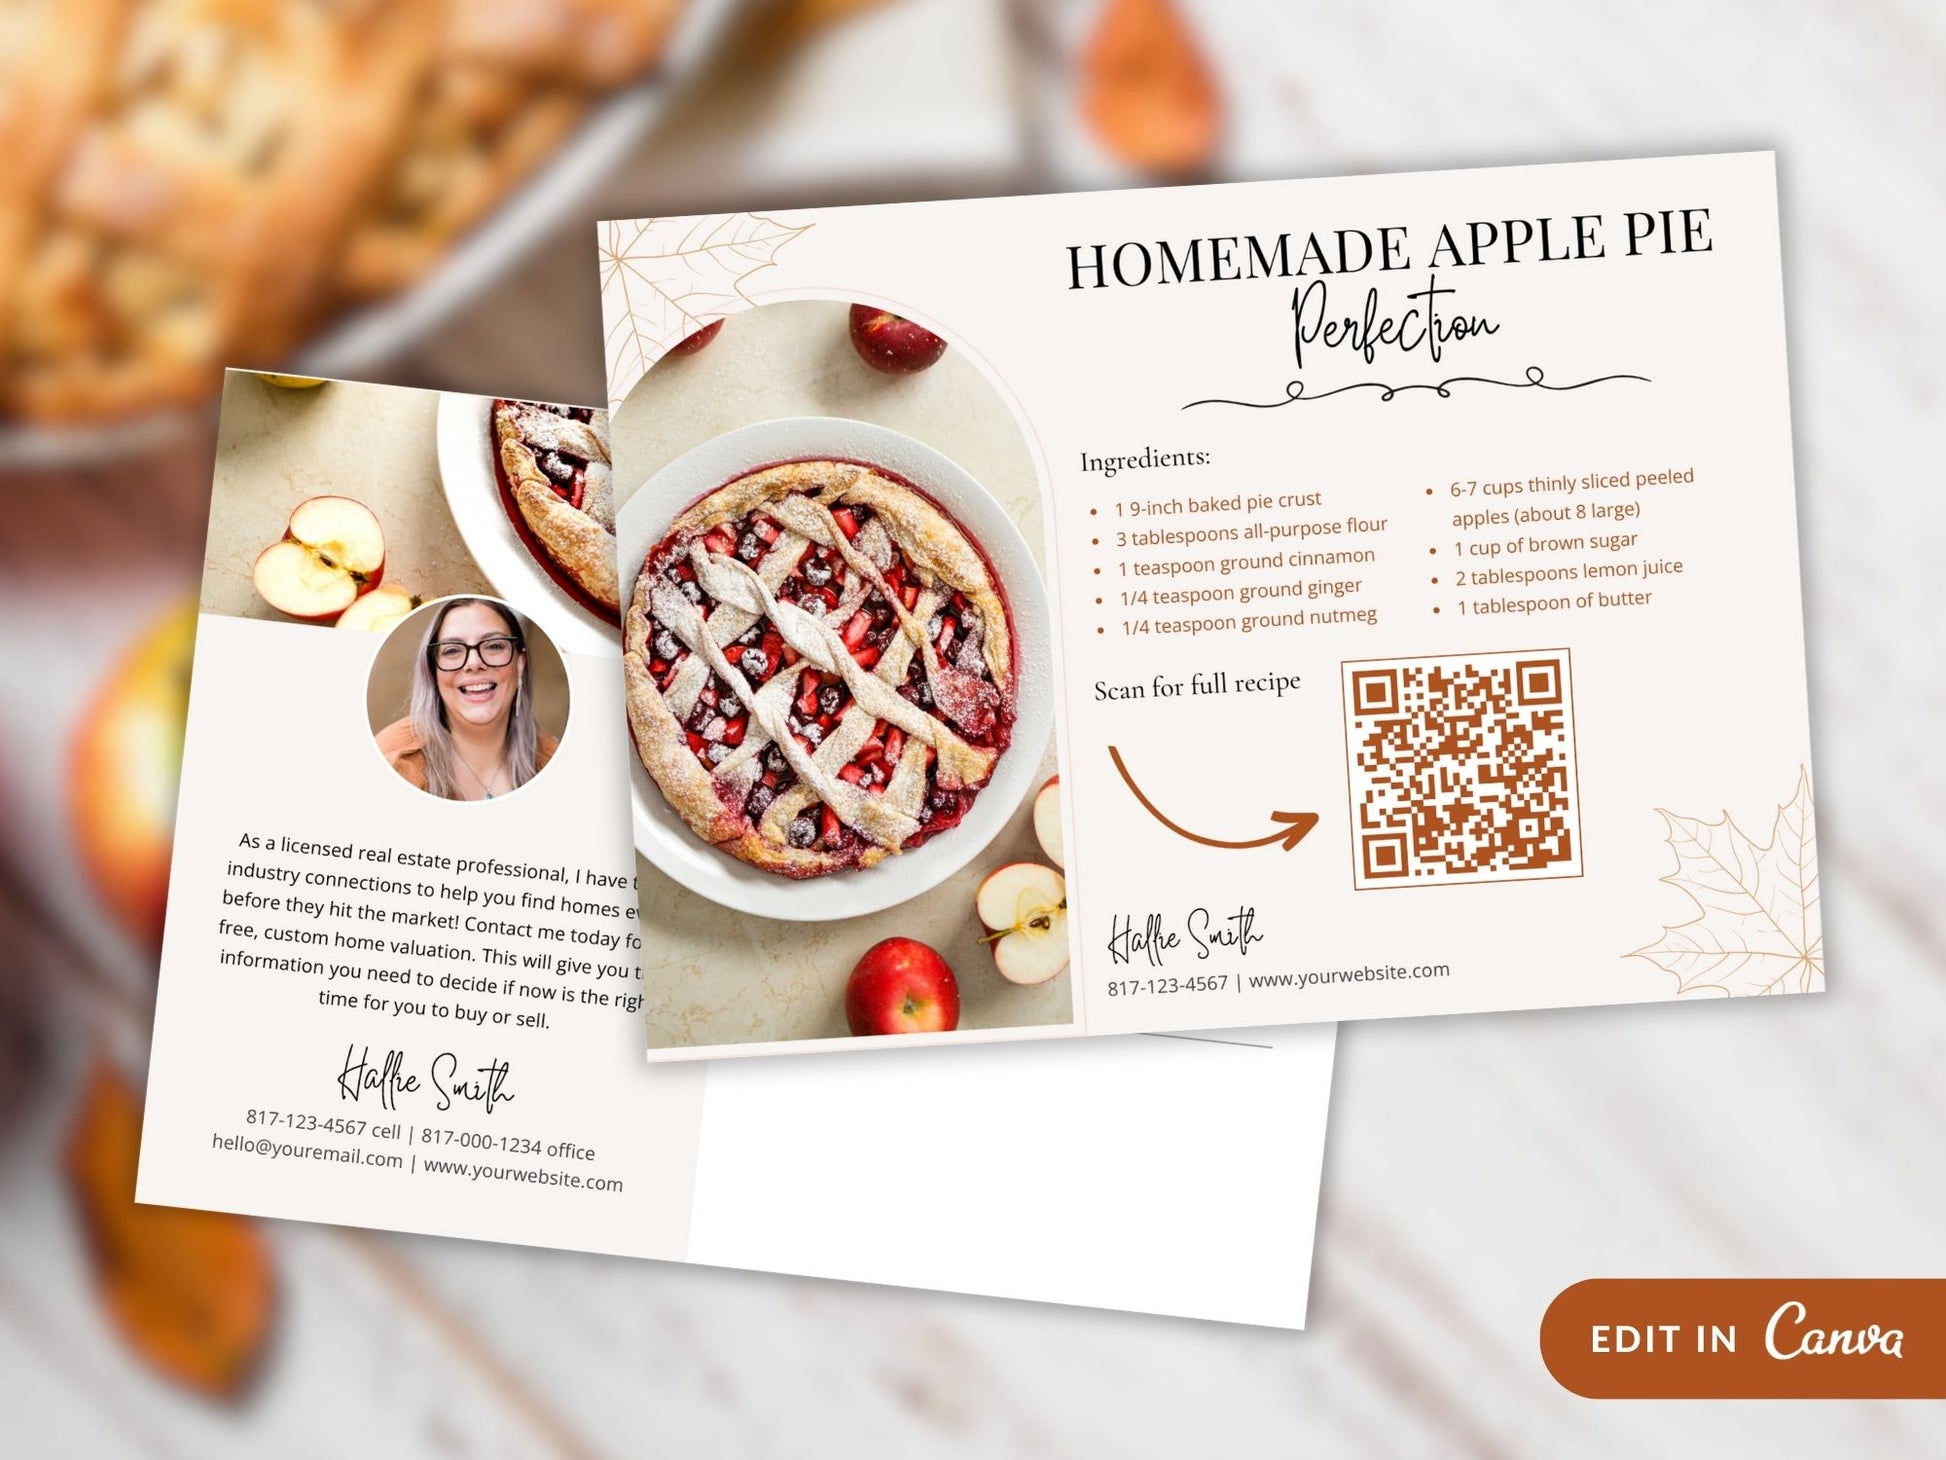 Real Estate Thanksgiving Recipe Postcard Bundle - Delightful bundle combining festive design with mouthwatering recipes for a unique and engaging way to express gratitude and connect with clients during the Thanksgiving season.